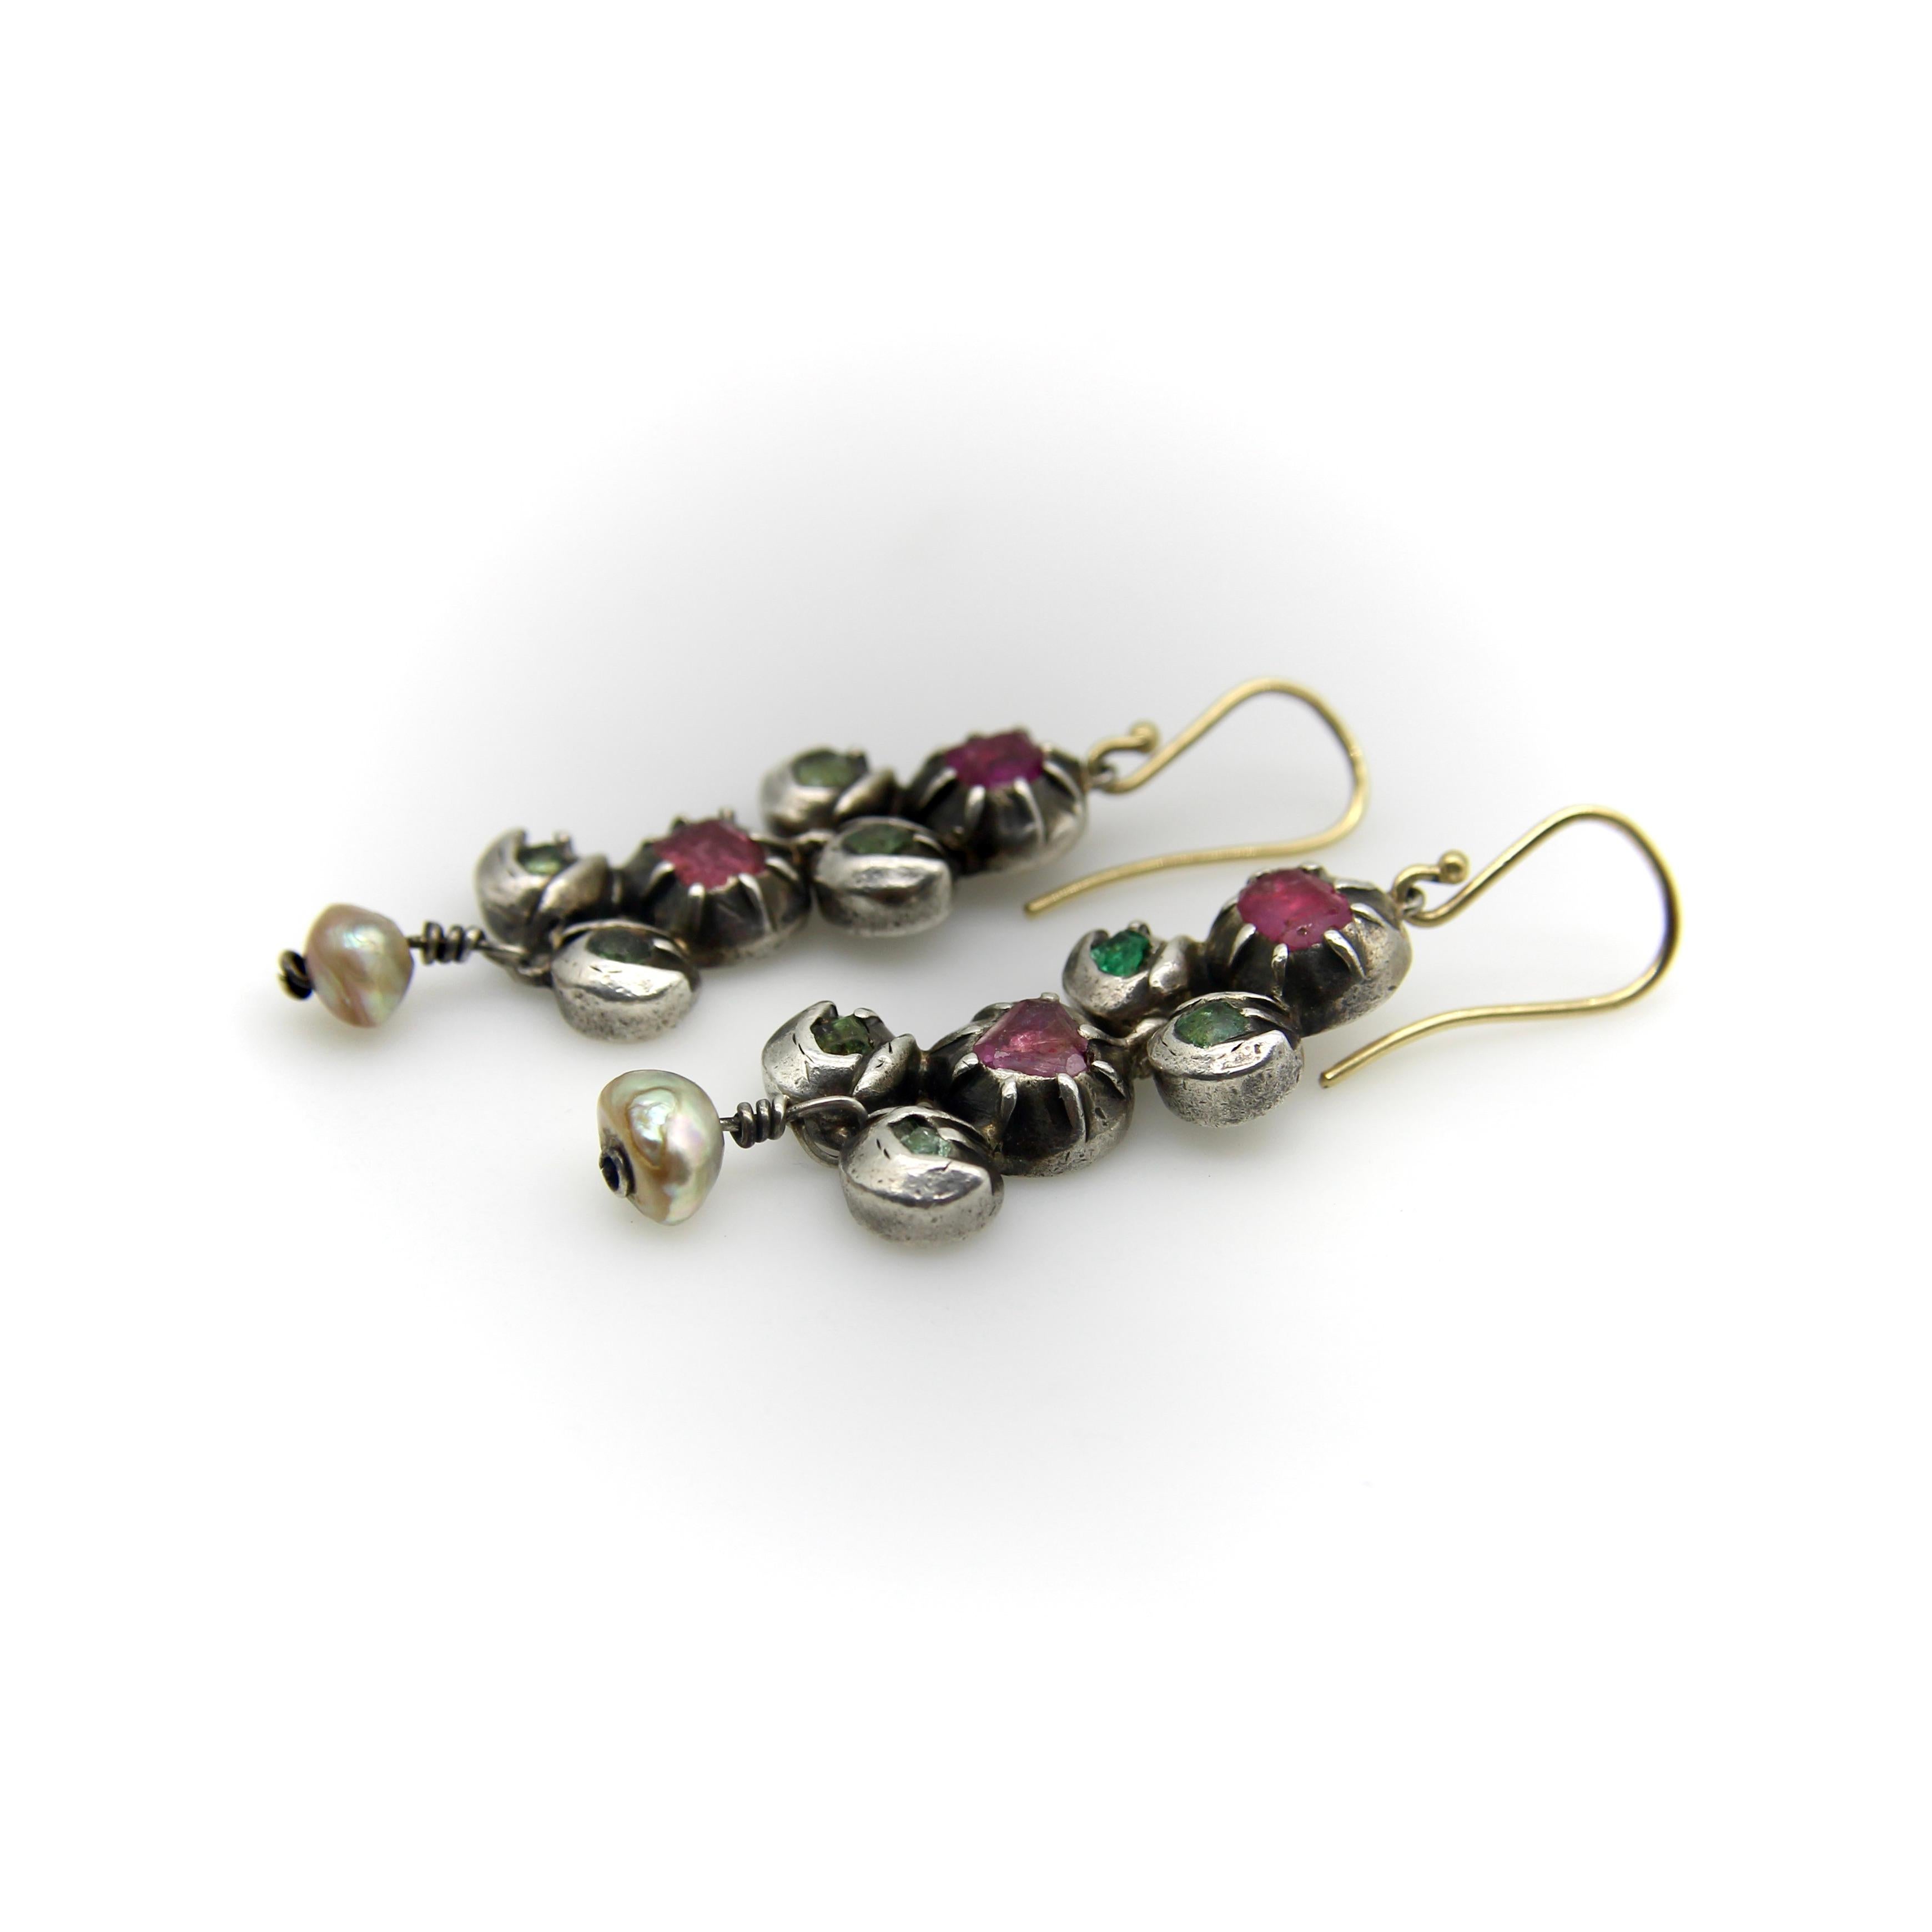 Georgian Revival Silver & 18K Gold Ruby, Emerald, & Pearl Giardinetti Earrings In Good Condition For Sale In Venice, CA